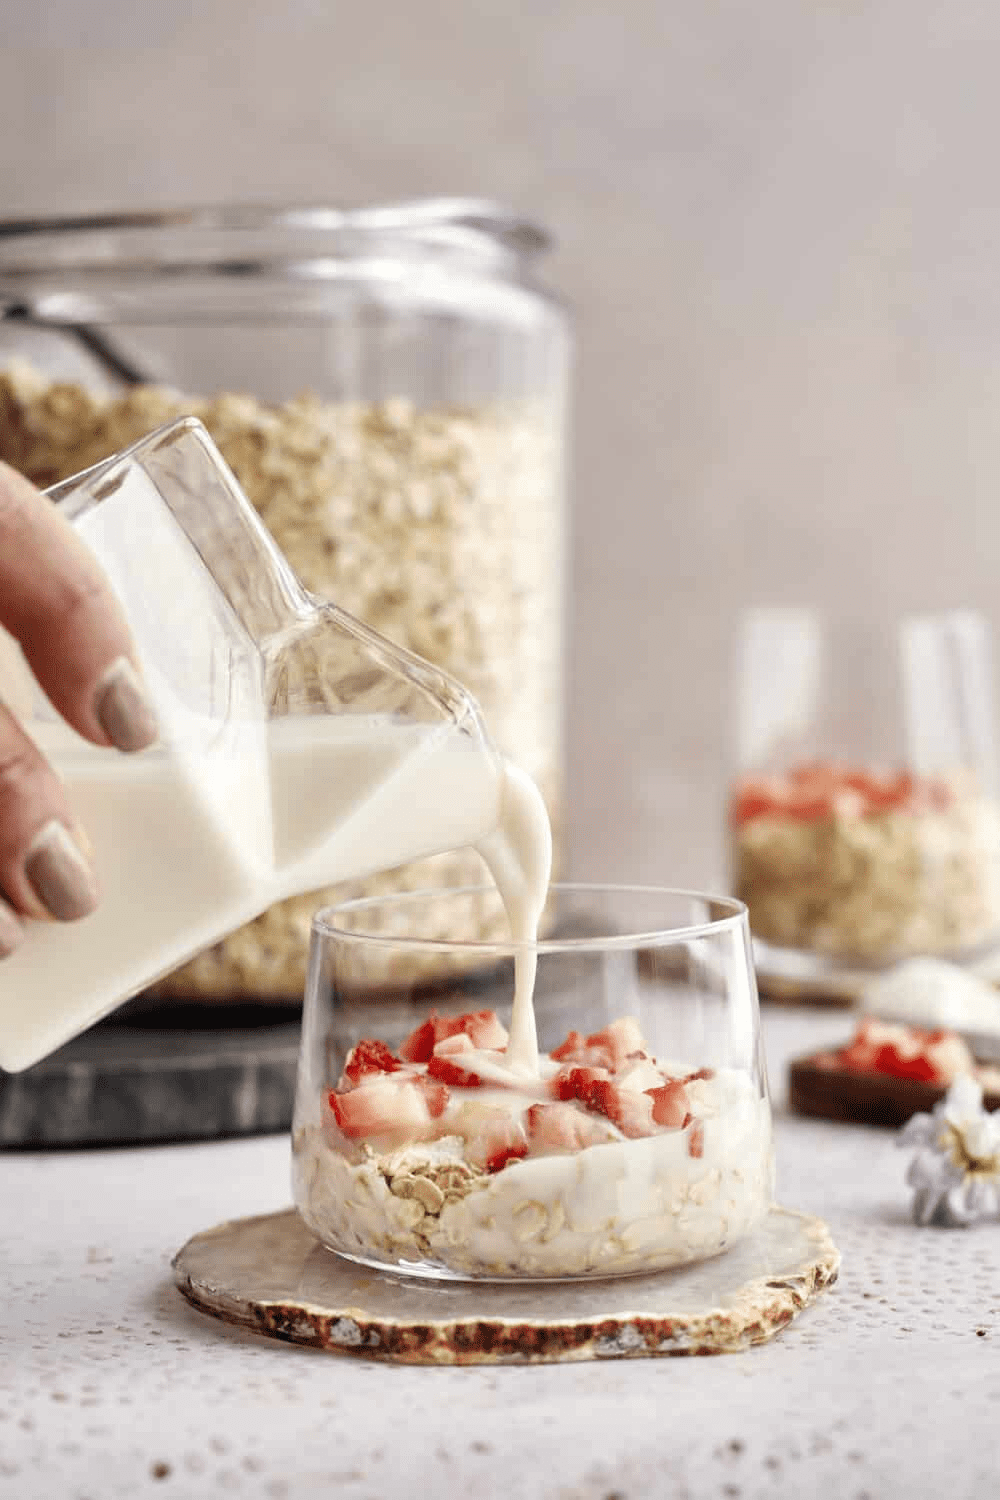 Milk being poured over oats and strawberries